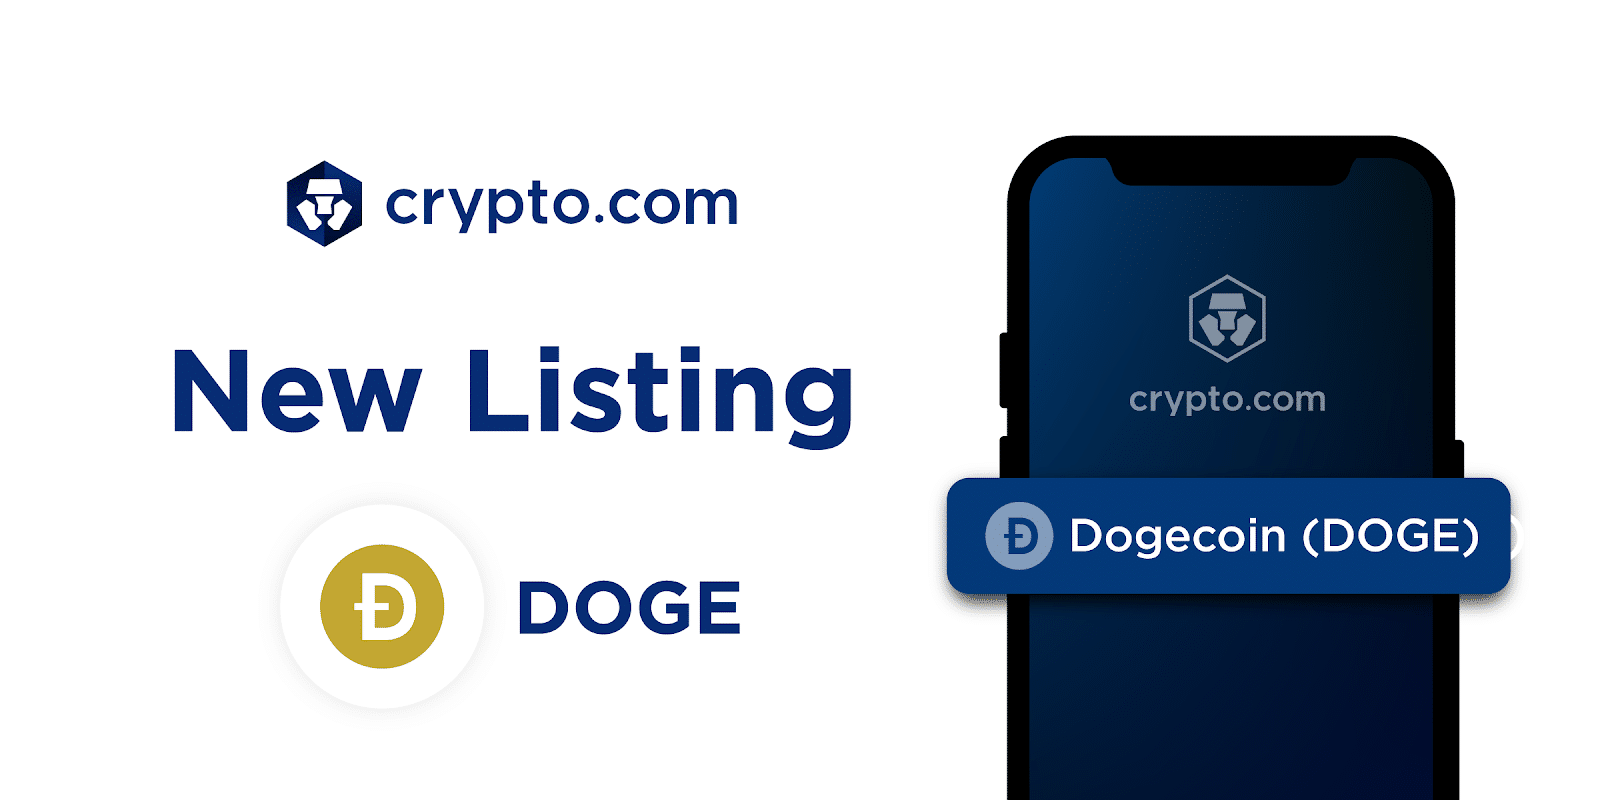 where can i buy dogecoin